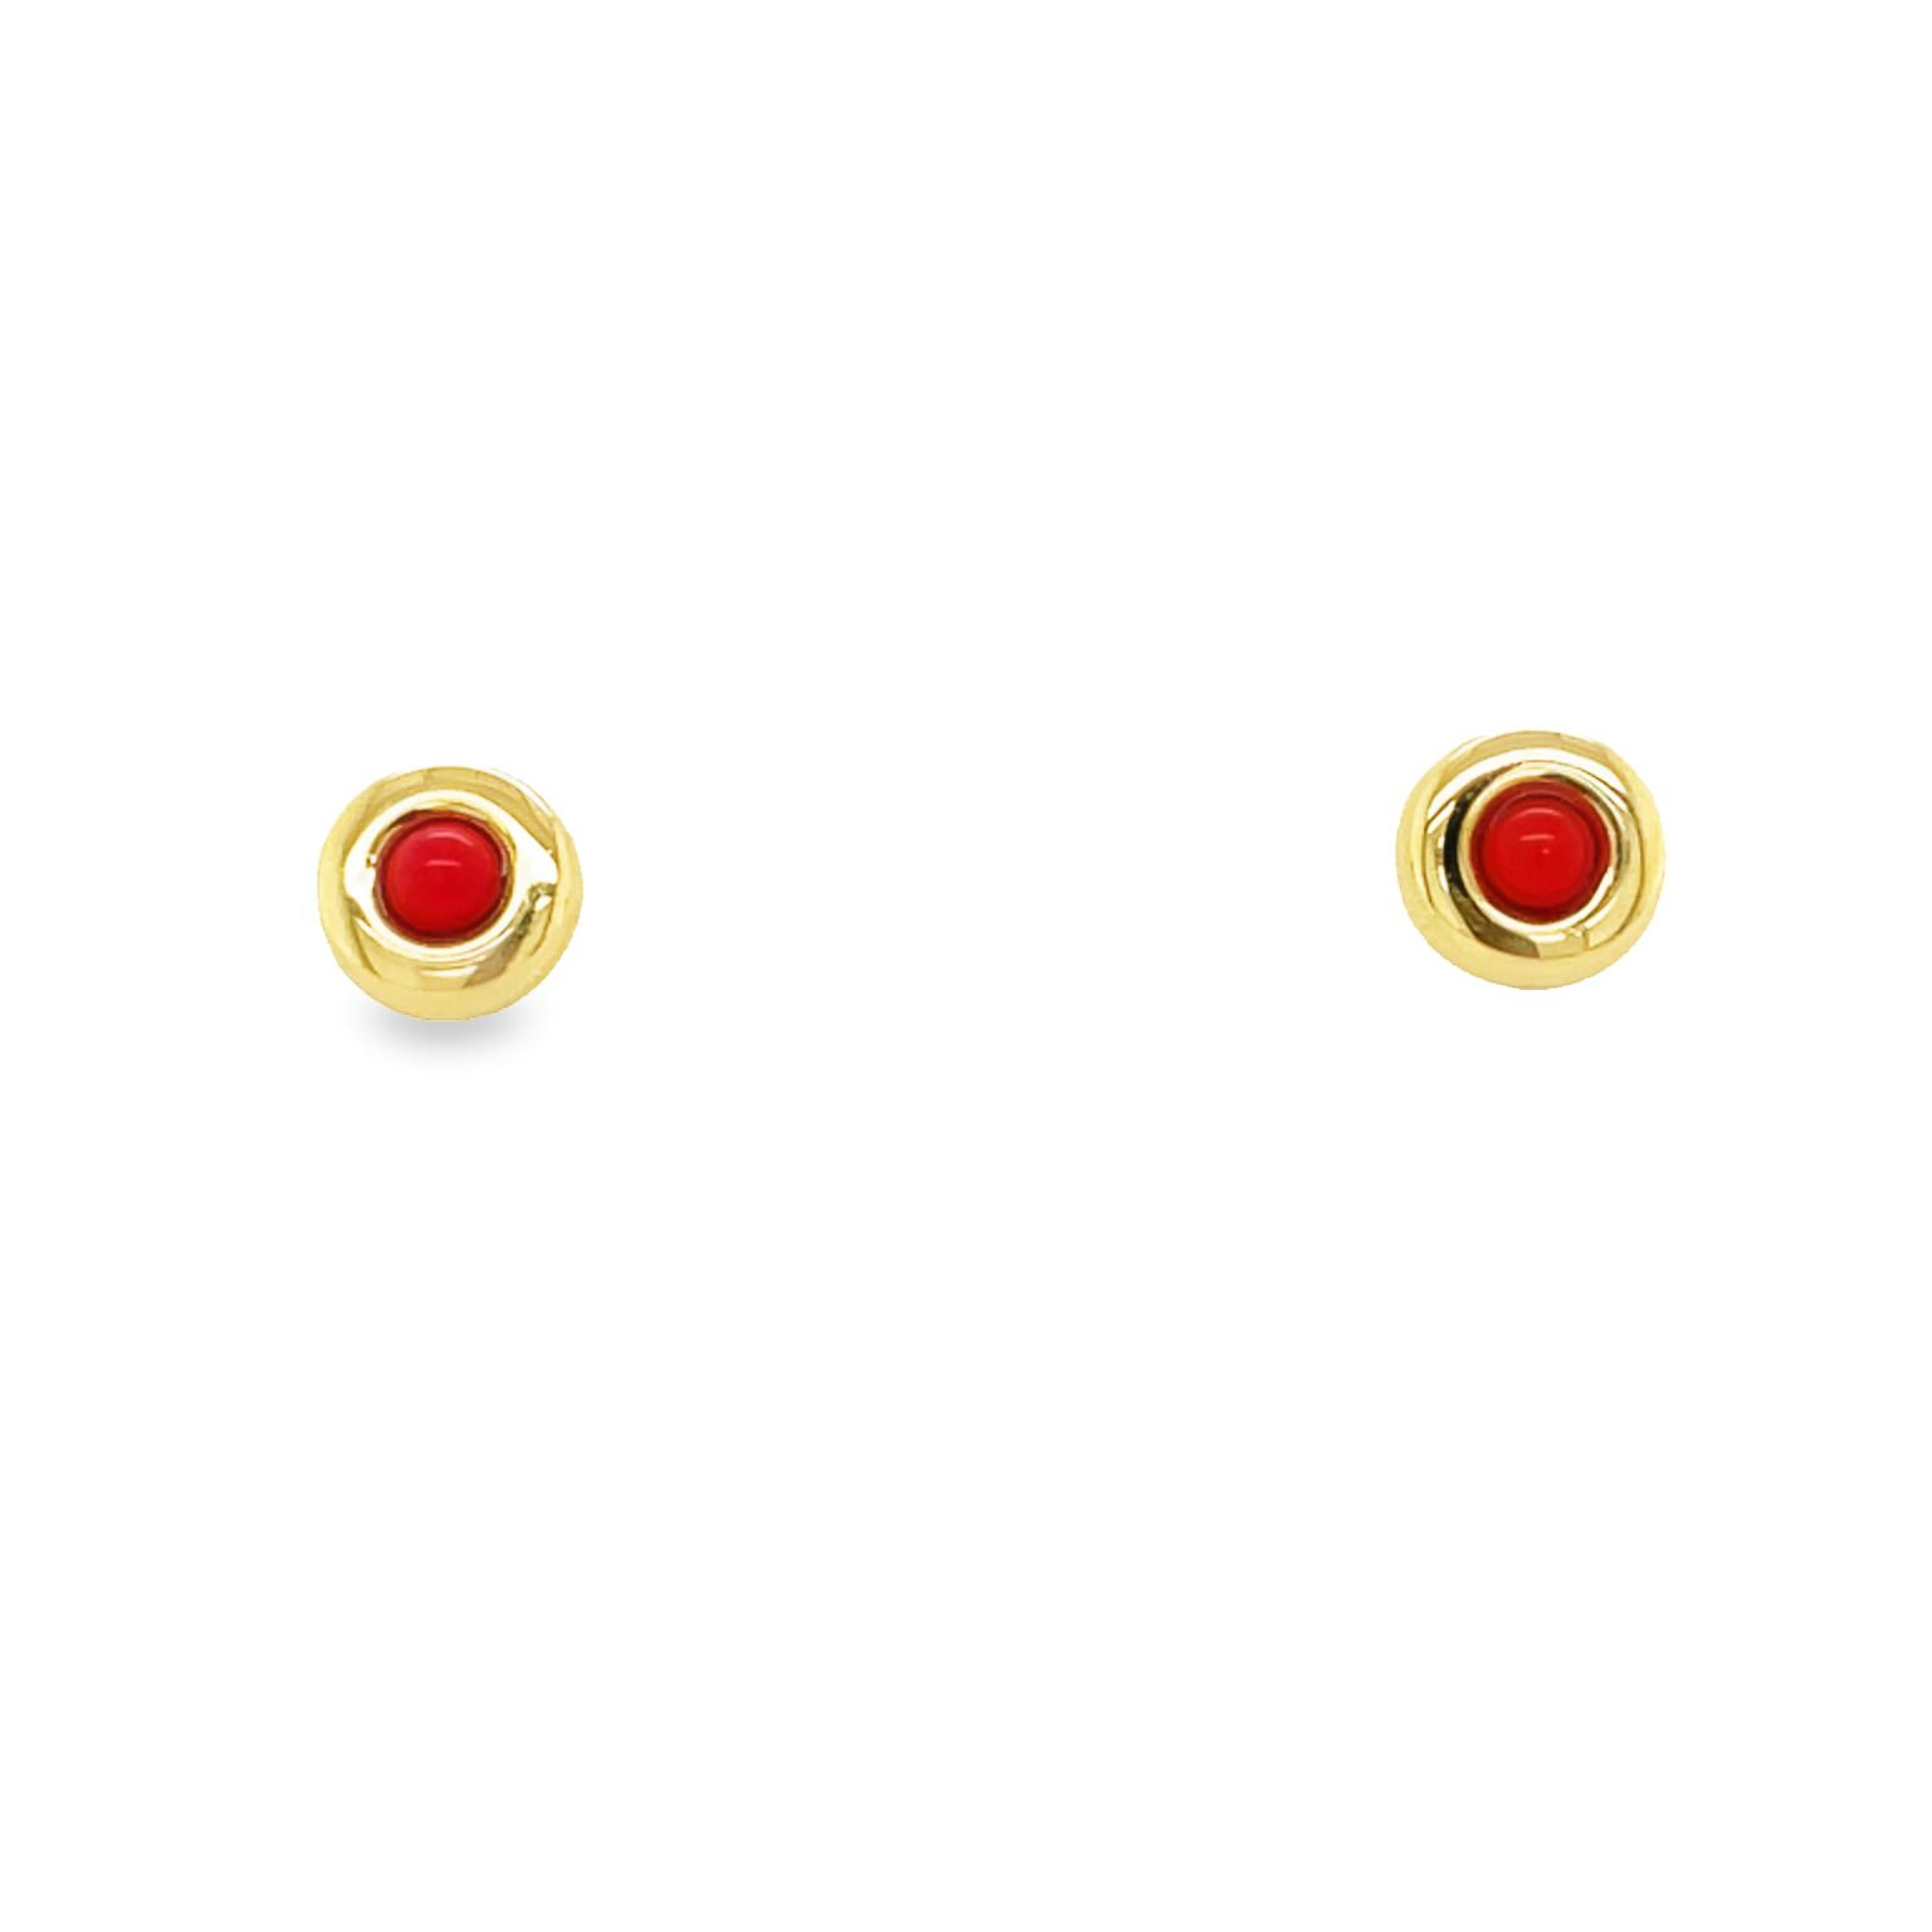 Delicate baby earrings crafted from 14k yellow gold, featuring small coral pieces and secure baby backs. These earrings offer a beautiful combination of luxurious gold and striking coral, securely attached with baby backs for extra peace of mind.